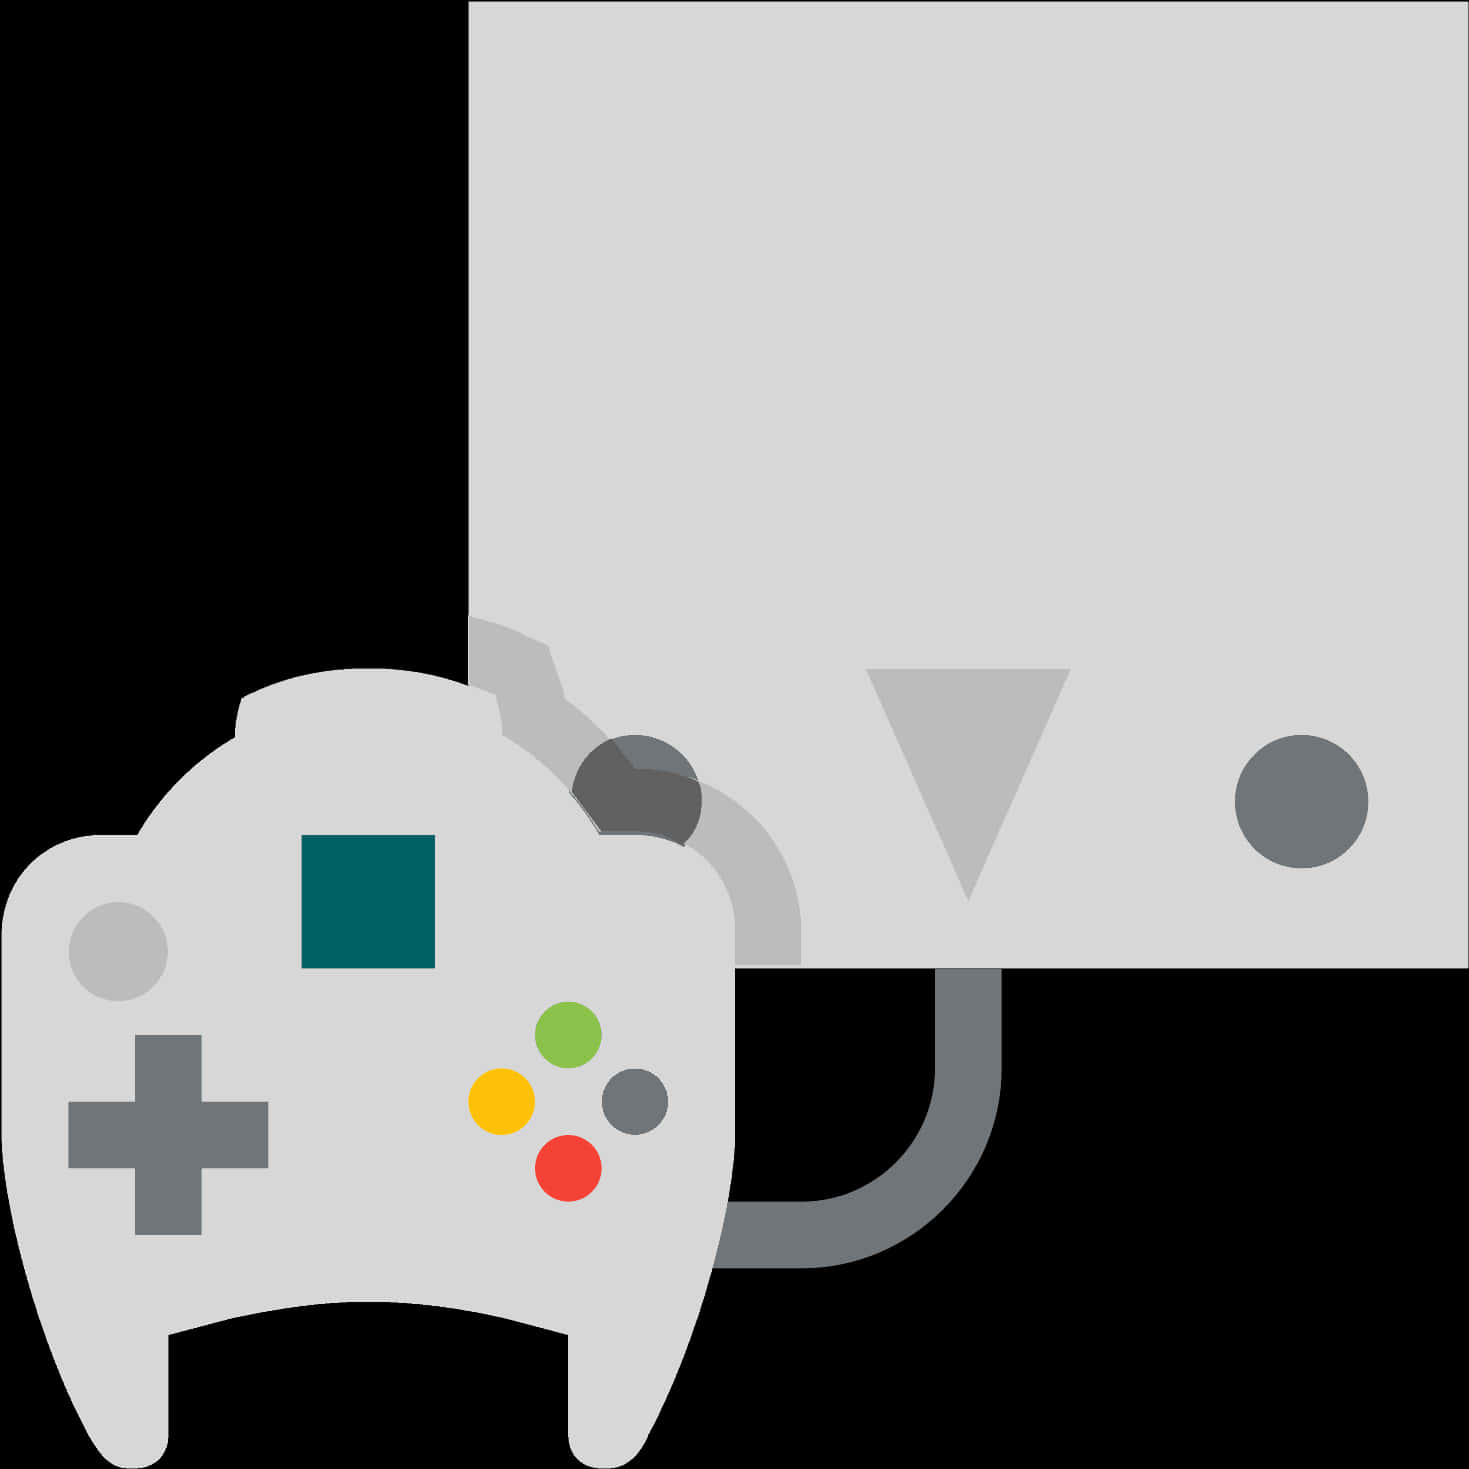 Video Game Controller Graphic